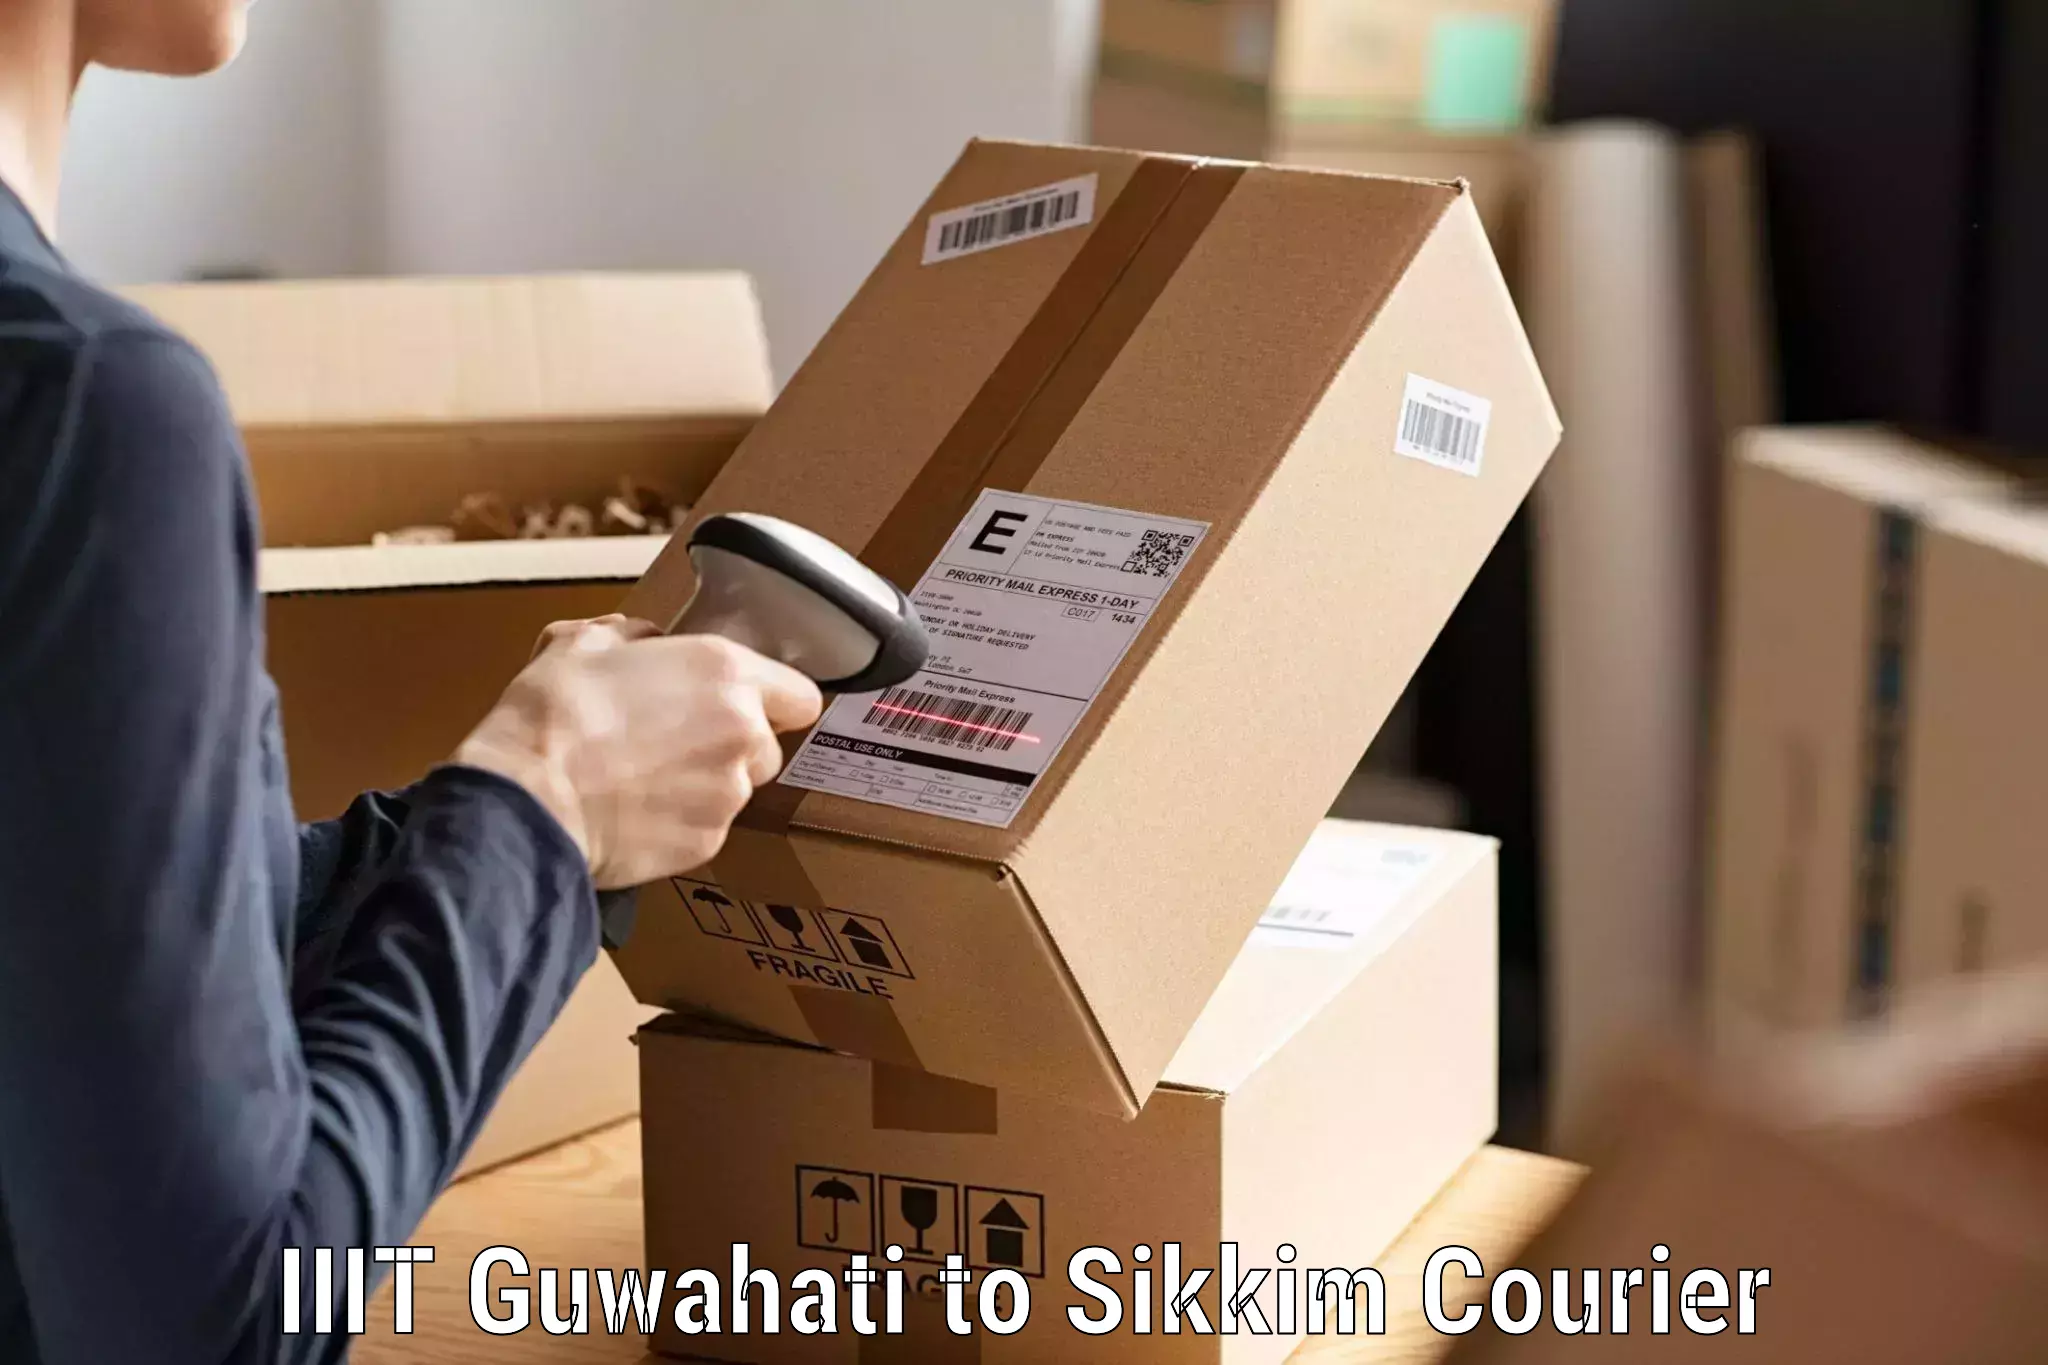 Easy access courier services IIIT Guwahati to Jorethang